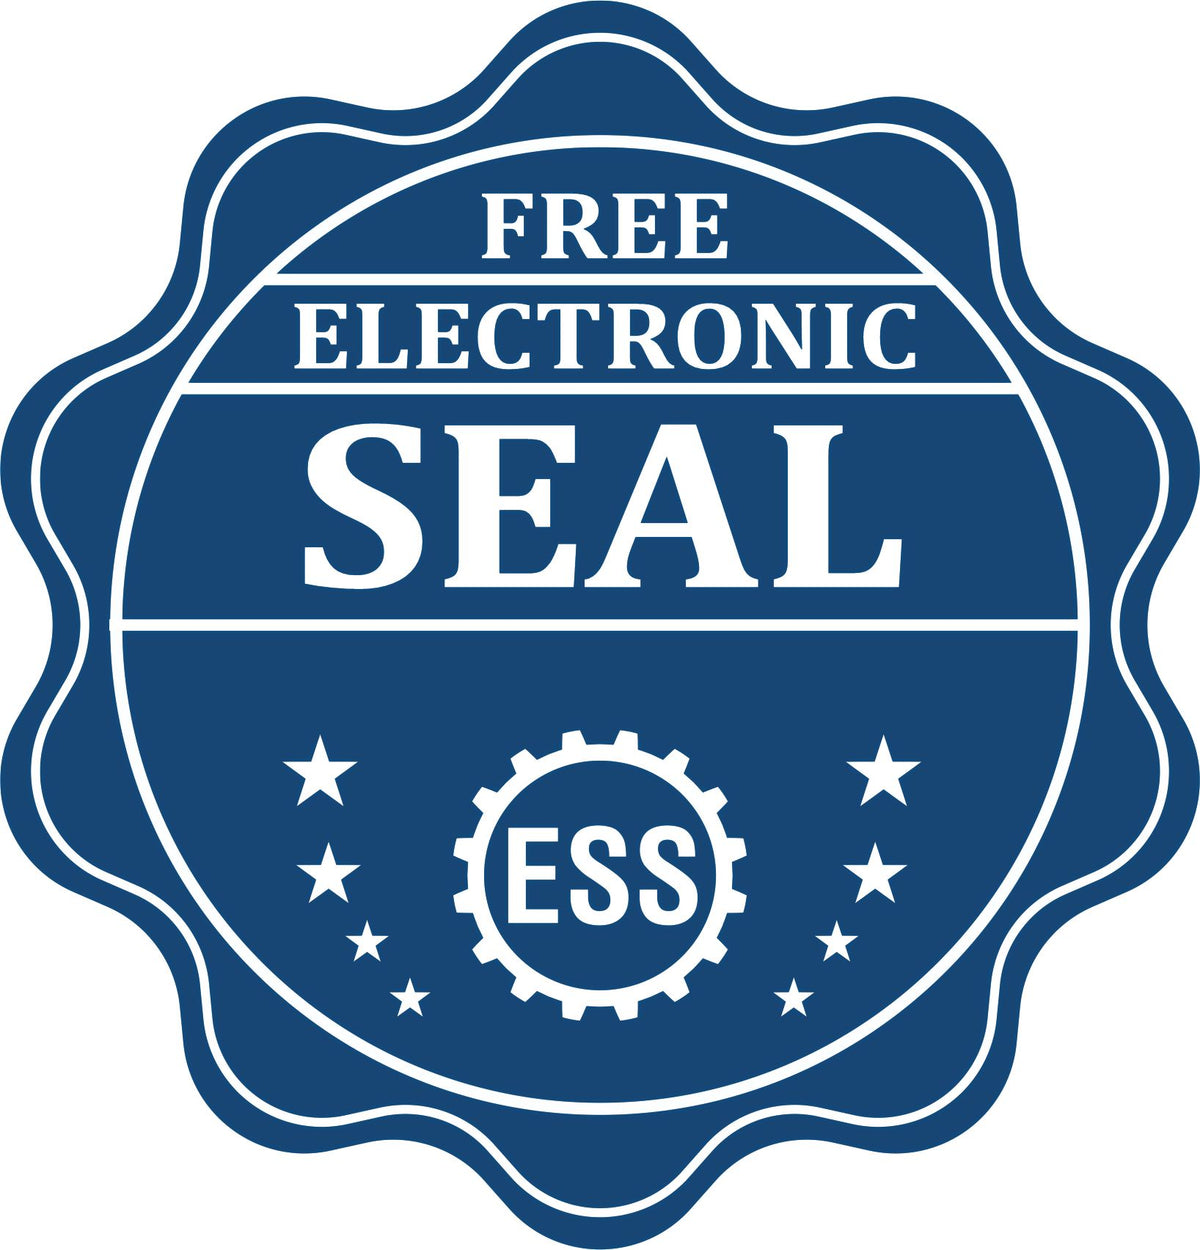 A badge showing a free electronic seal for the Slim Pre-Inked Missouri Professional Geologist Seal Stamp with stars and the ESS gear on the emblem.